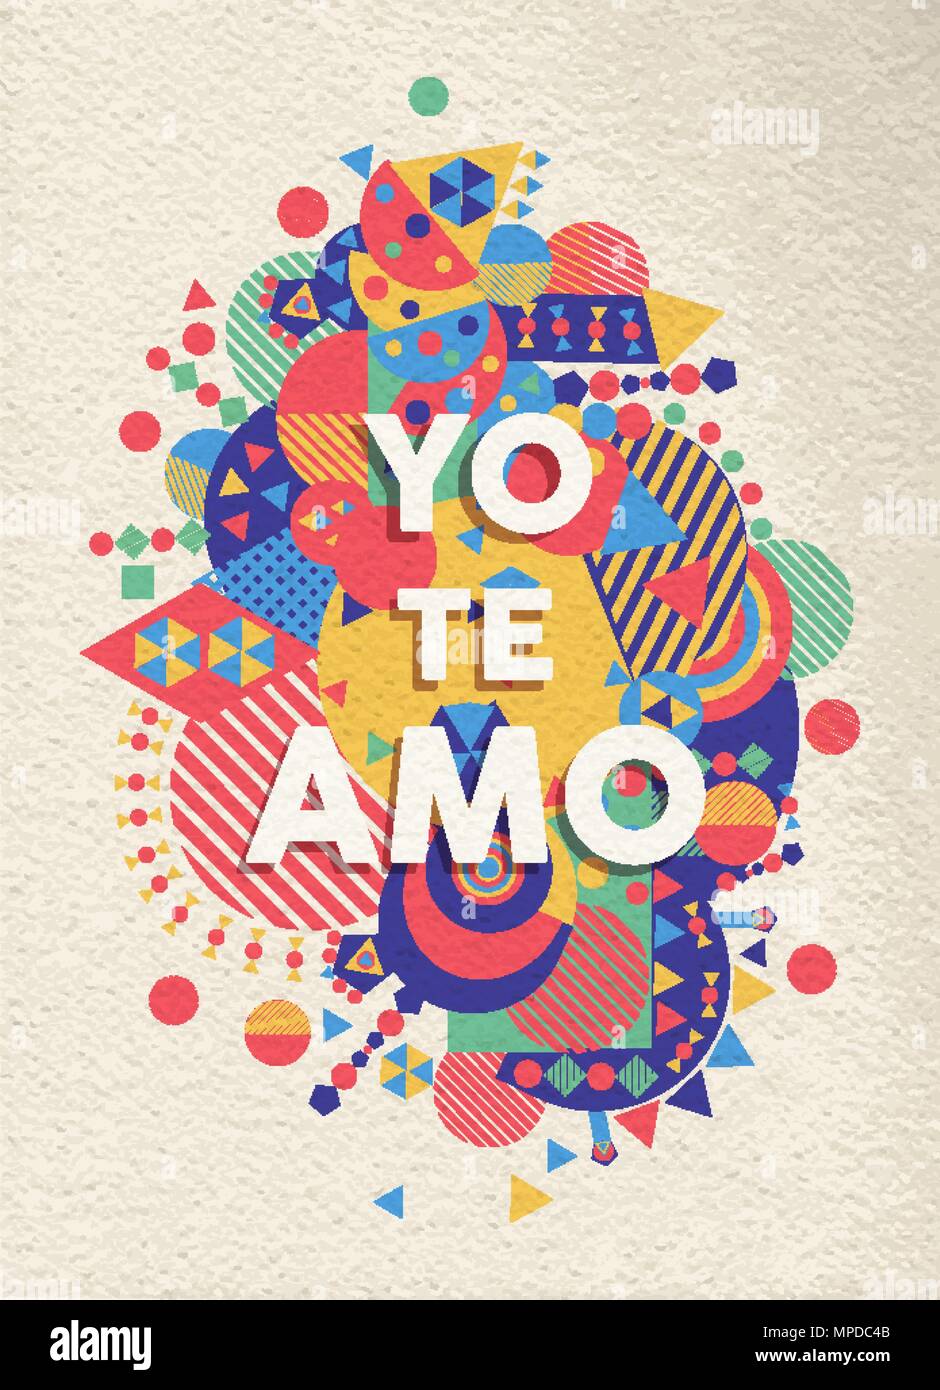 I love you colorful typography poster in spanish language. Romantic quote design with paper texture background. EPS10 vector. Stock Vector